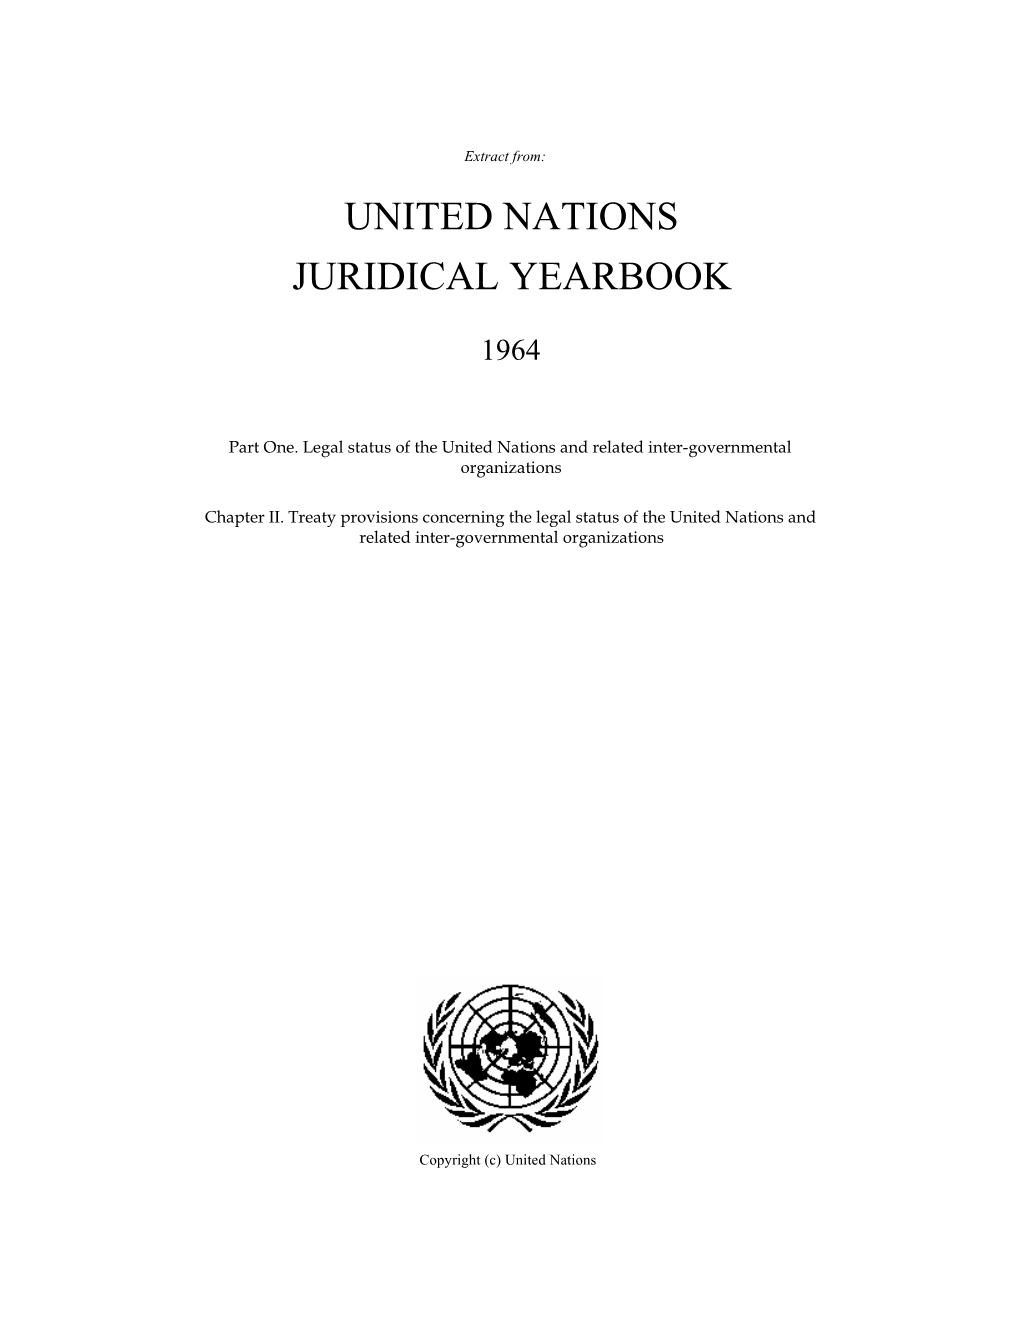 United Nations Juridical Yearbook, 1964